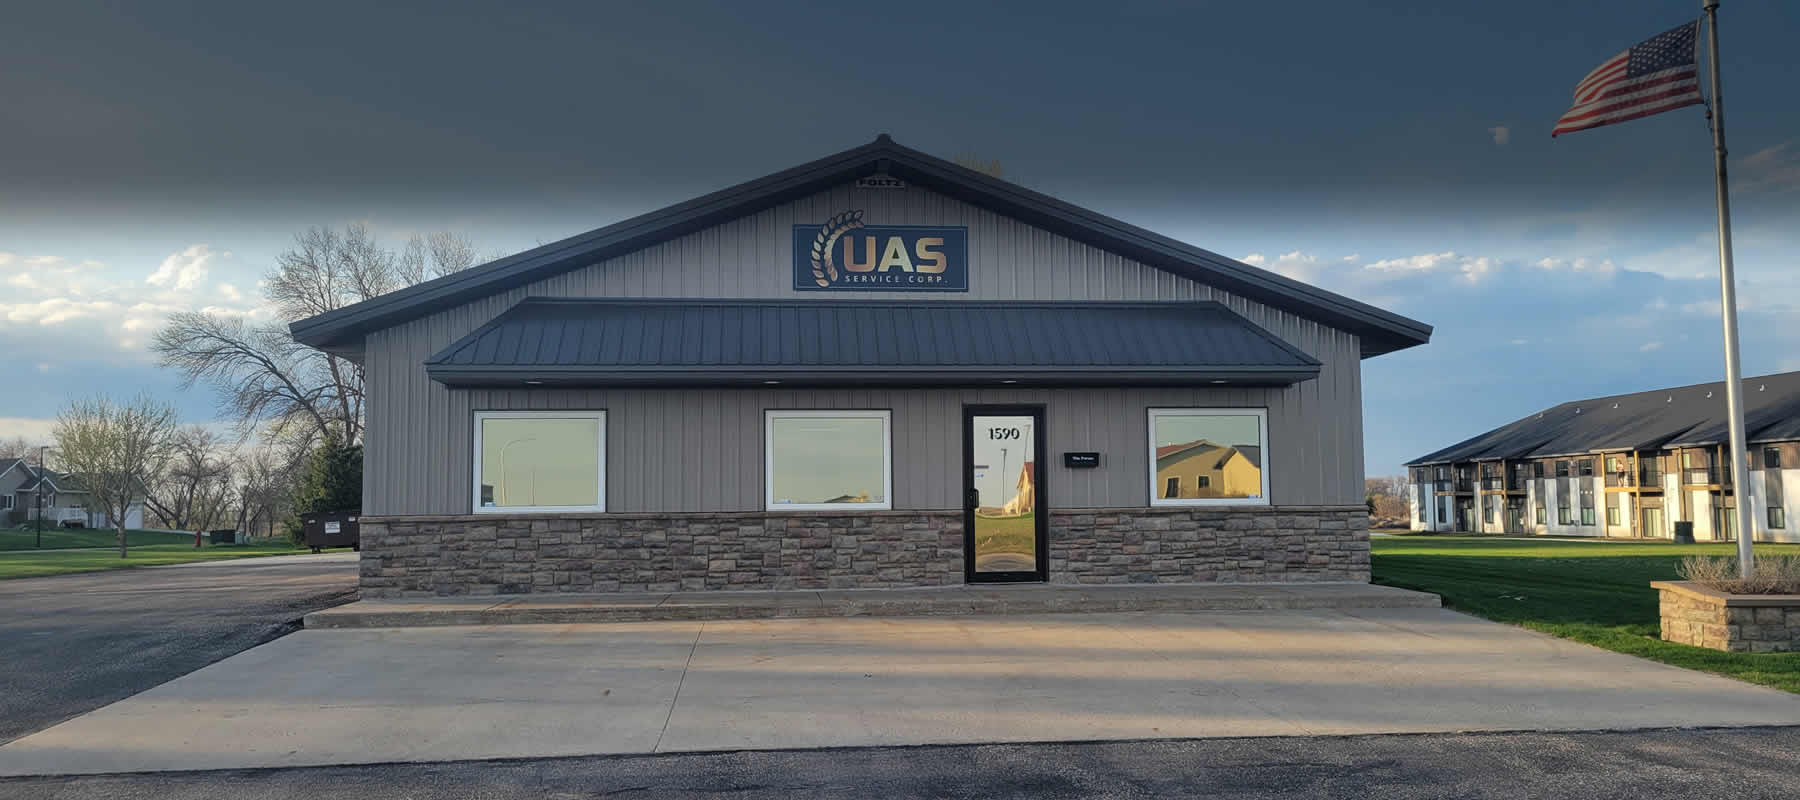 Contact UAS Service of Hawley, Minnesota to purchase or repair whole grain testing equipment.